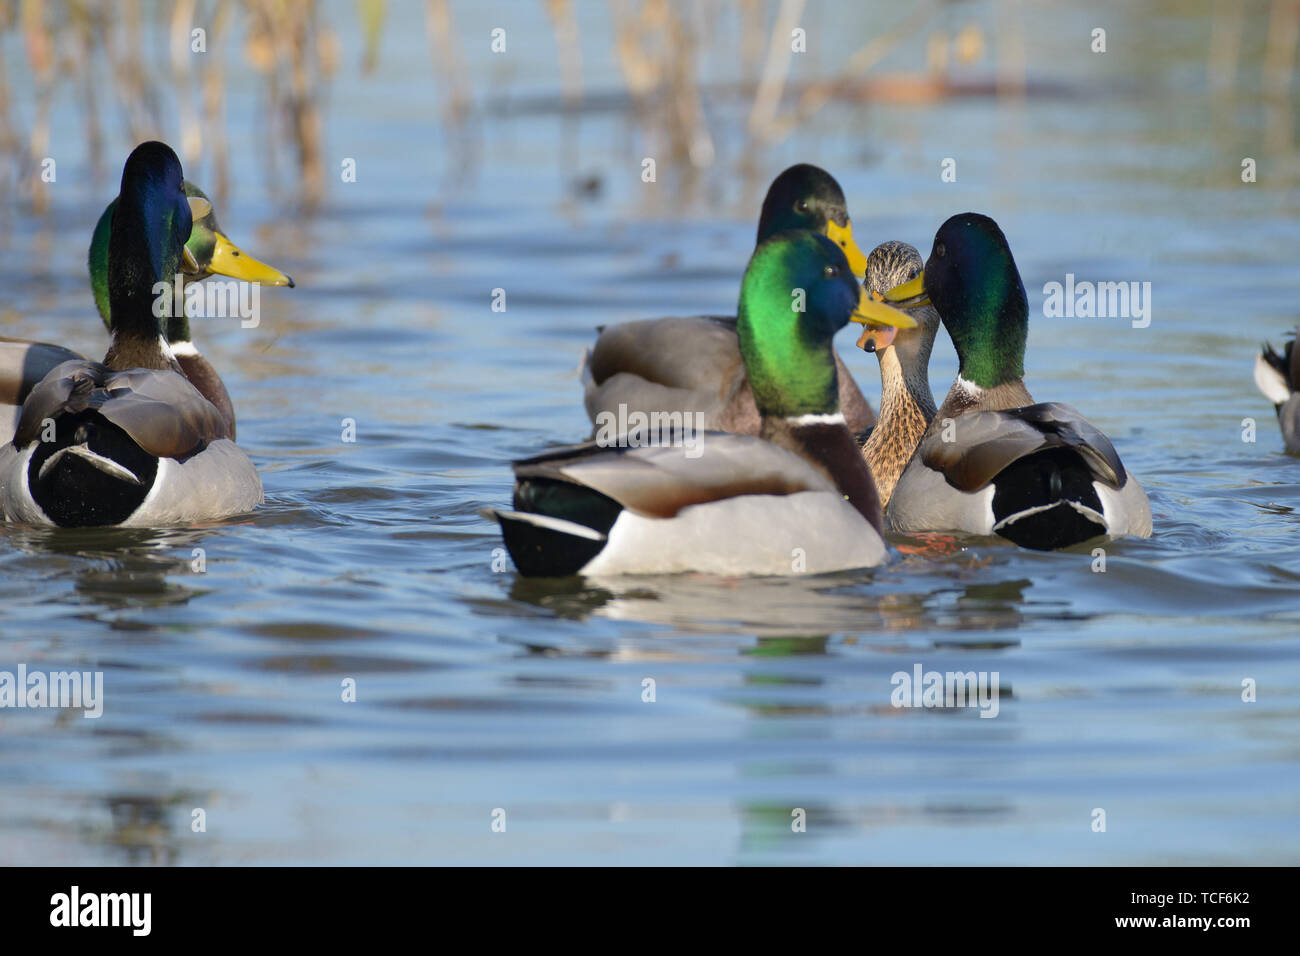 Flock of ducks floating in pure still lake on background of dried yellow sedge Stock Photo